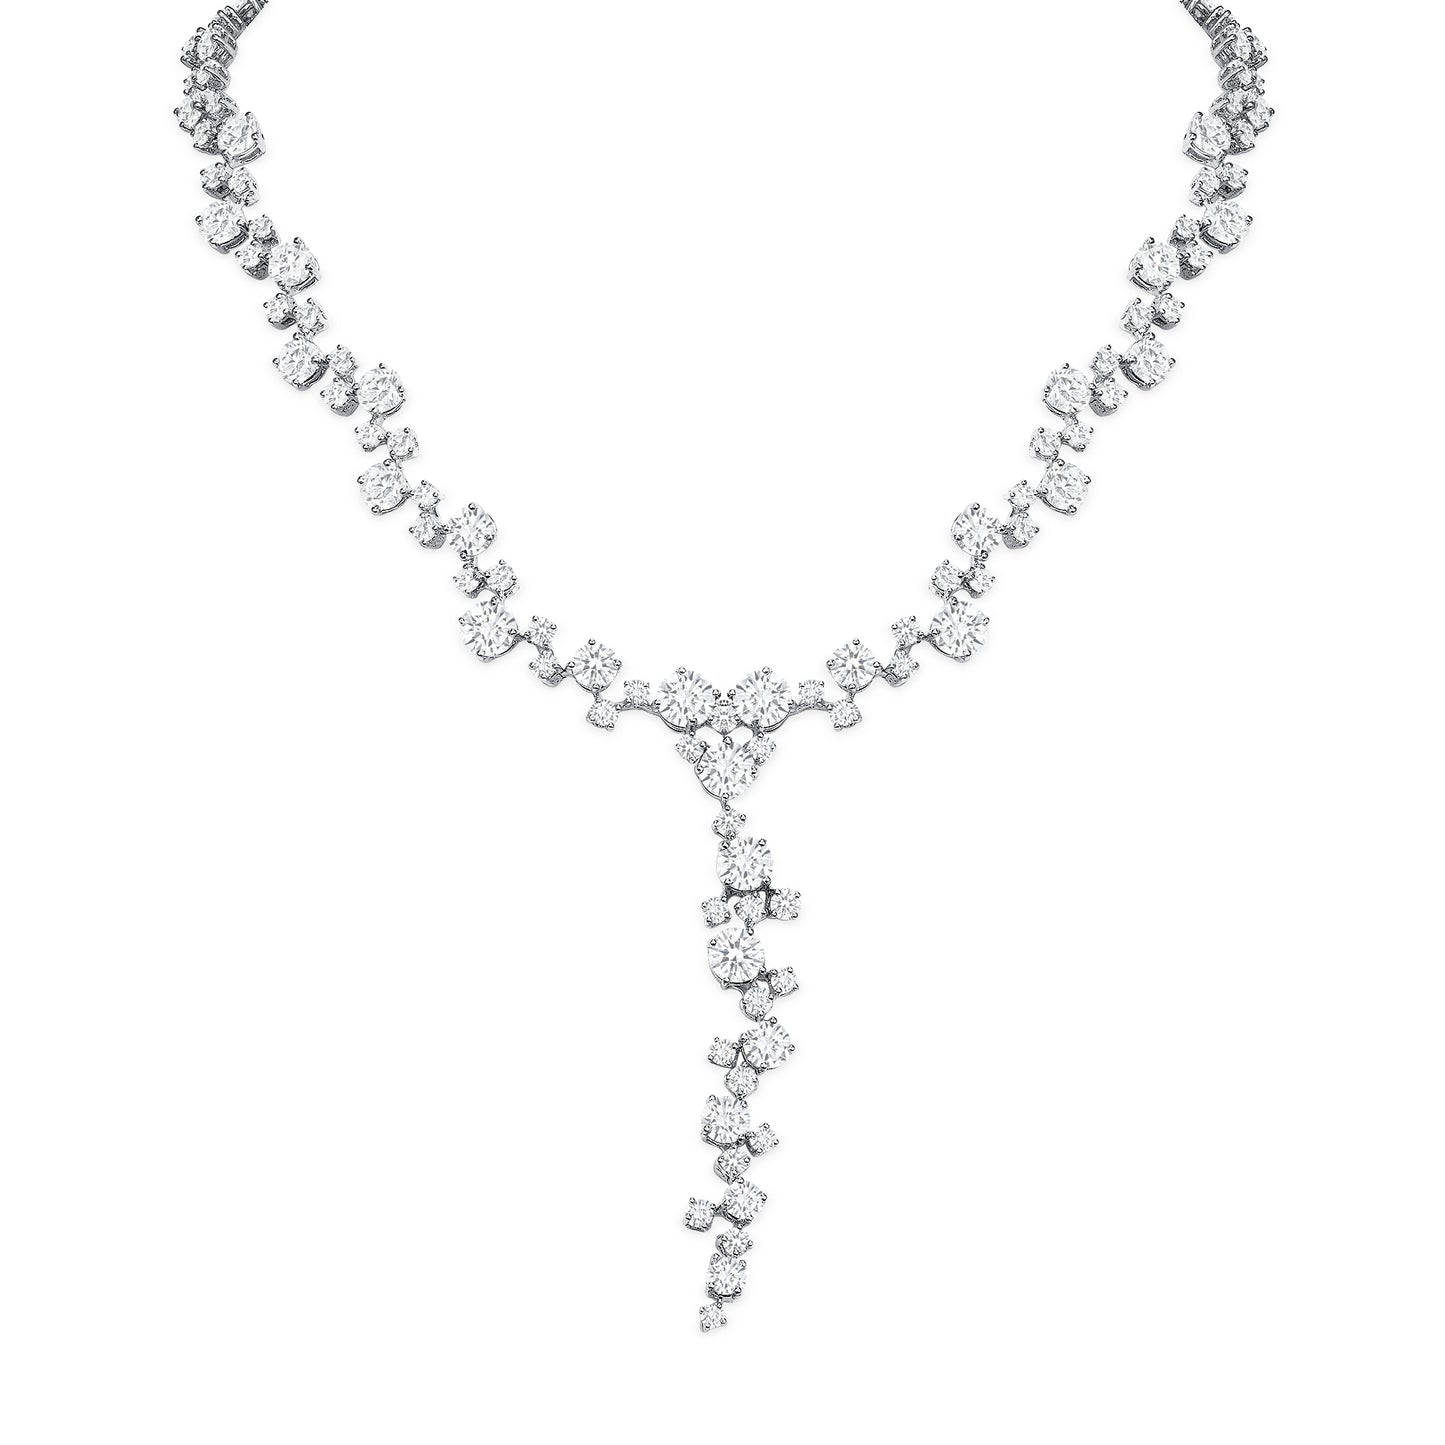 The Dispersed Diamond Statement Necklace